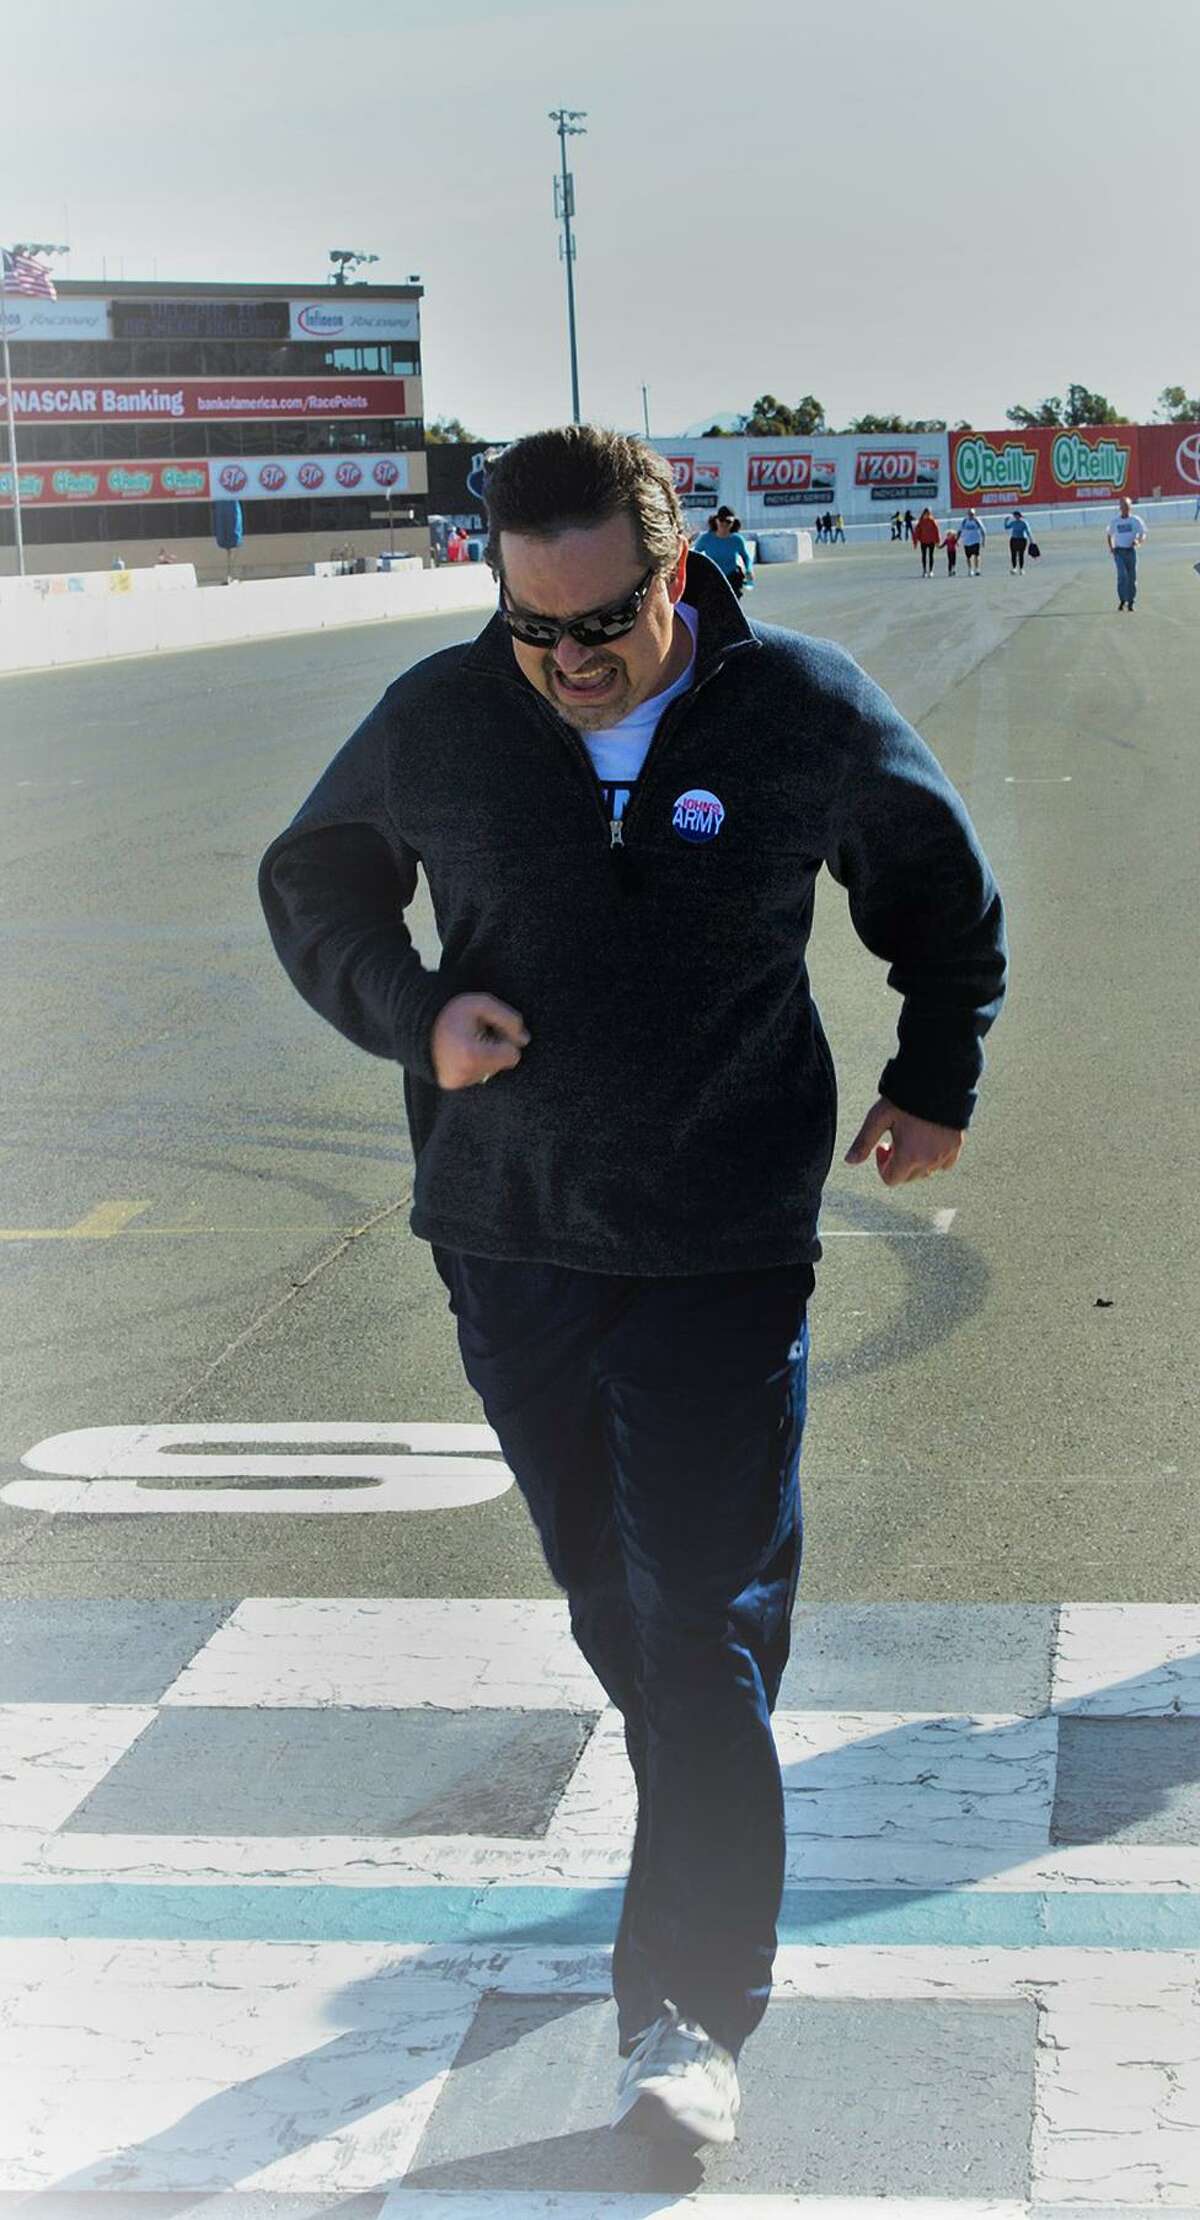 John Cardinale finishes the inaugural John’s March Against Cancer fundraiser in 2012. He ran nearly the entire 2.52-mile road course.